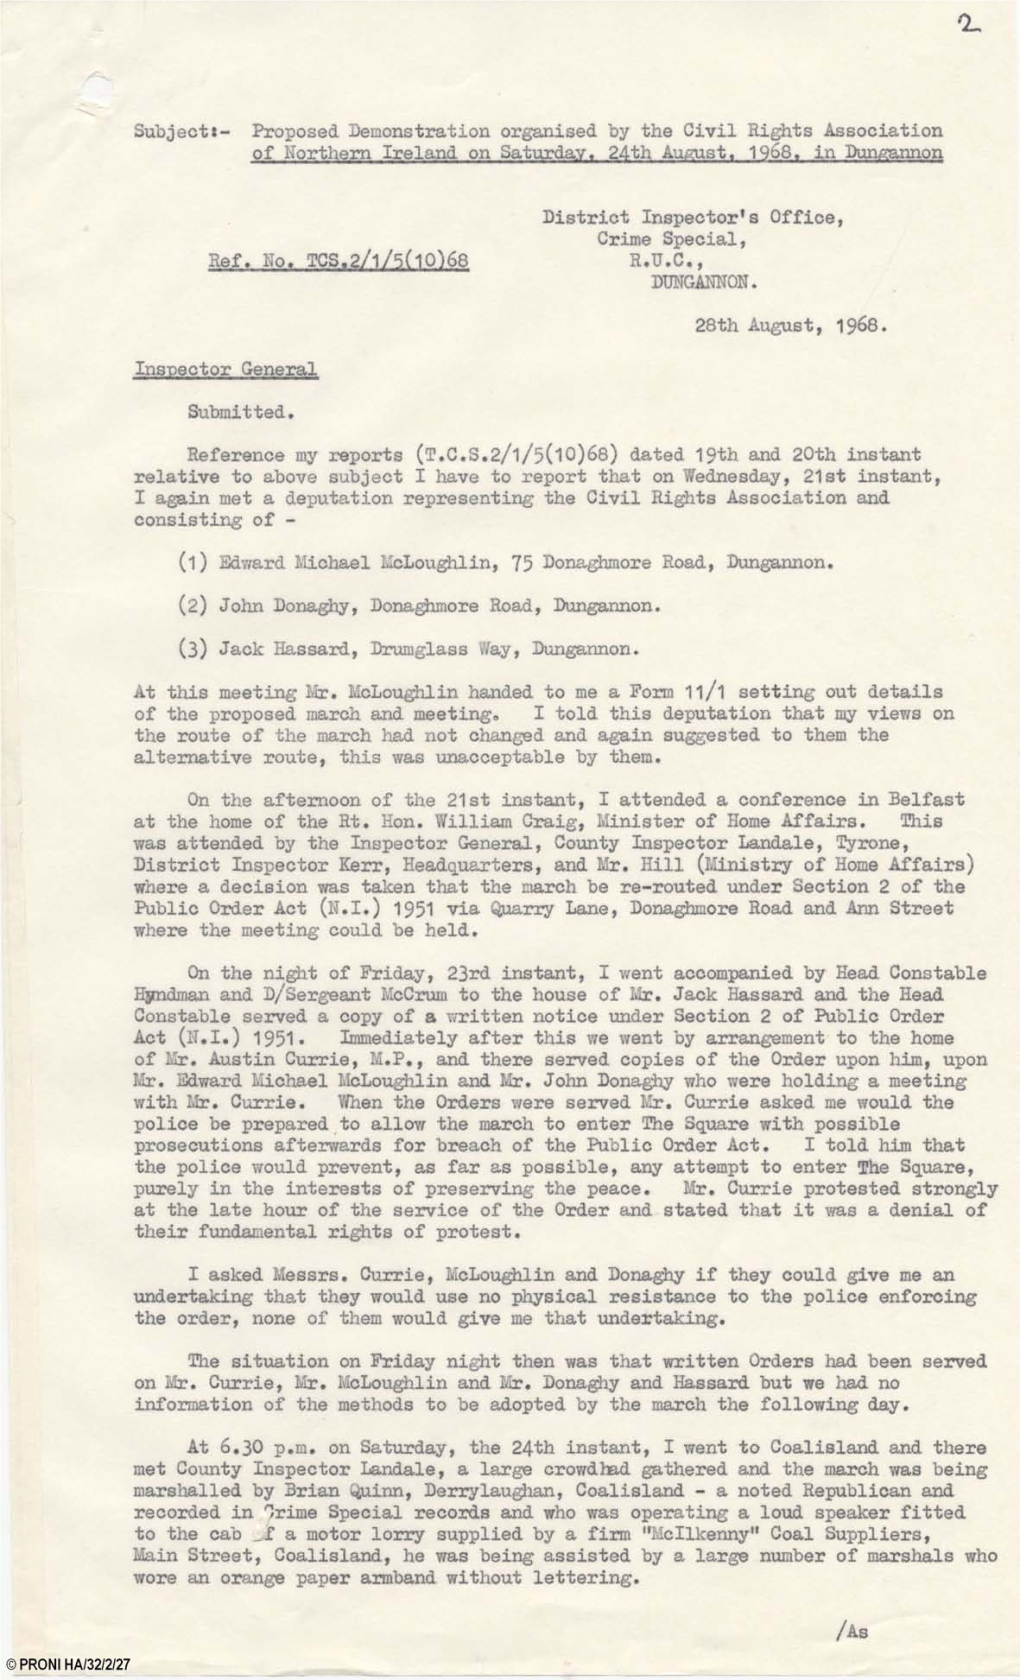 'Proposed Demonstration ... in Dungannon', (28 August 1968)